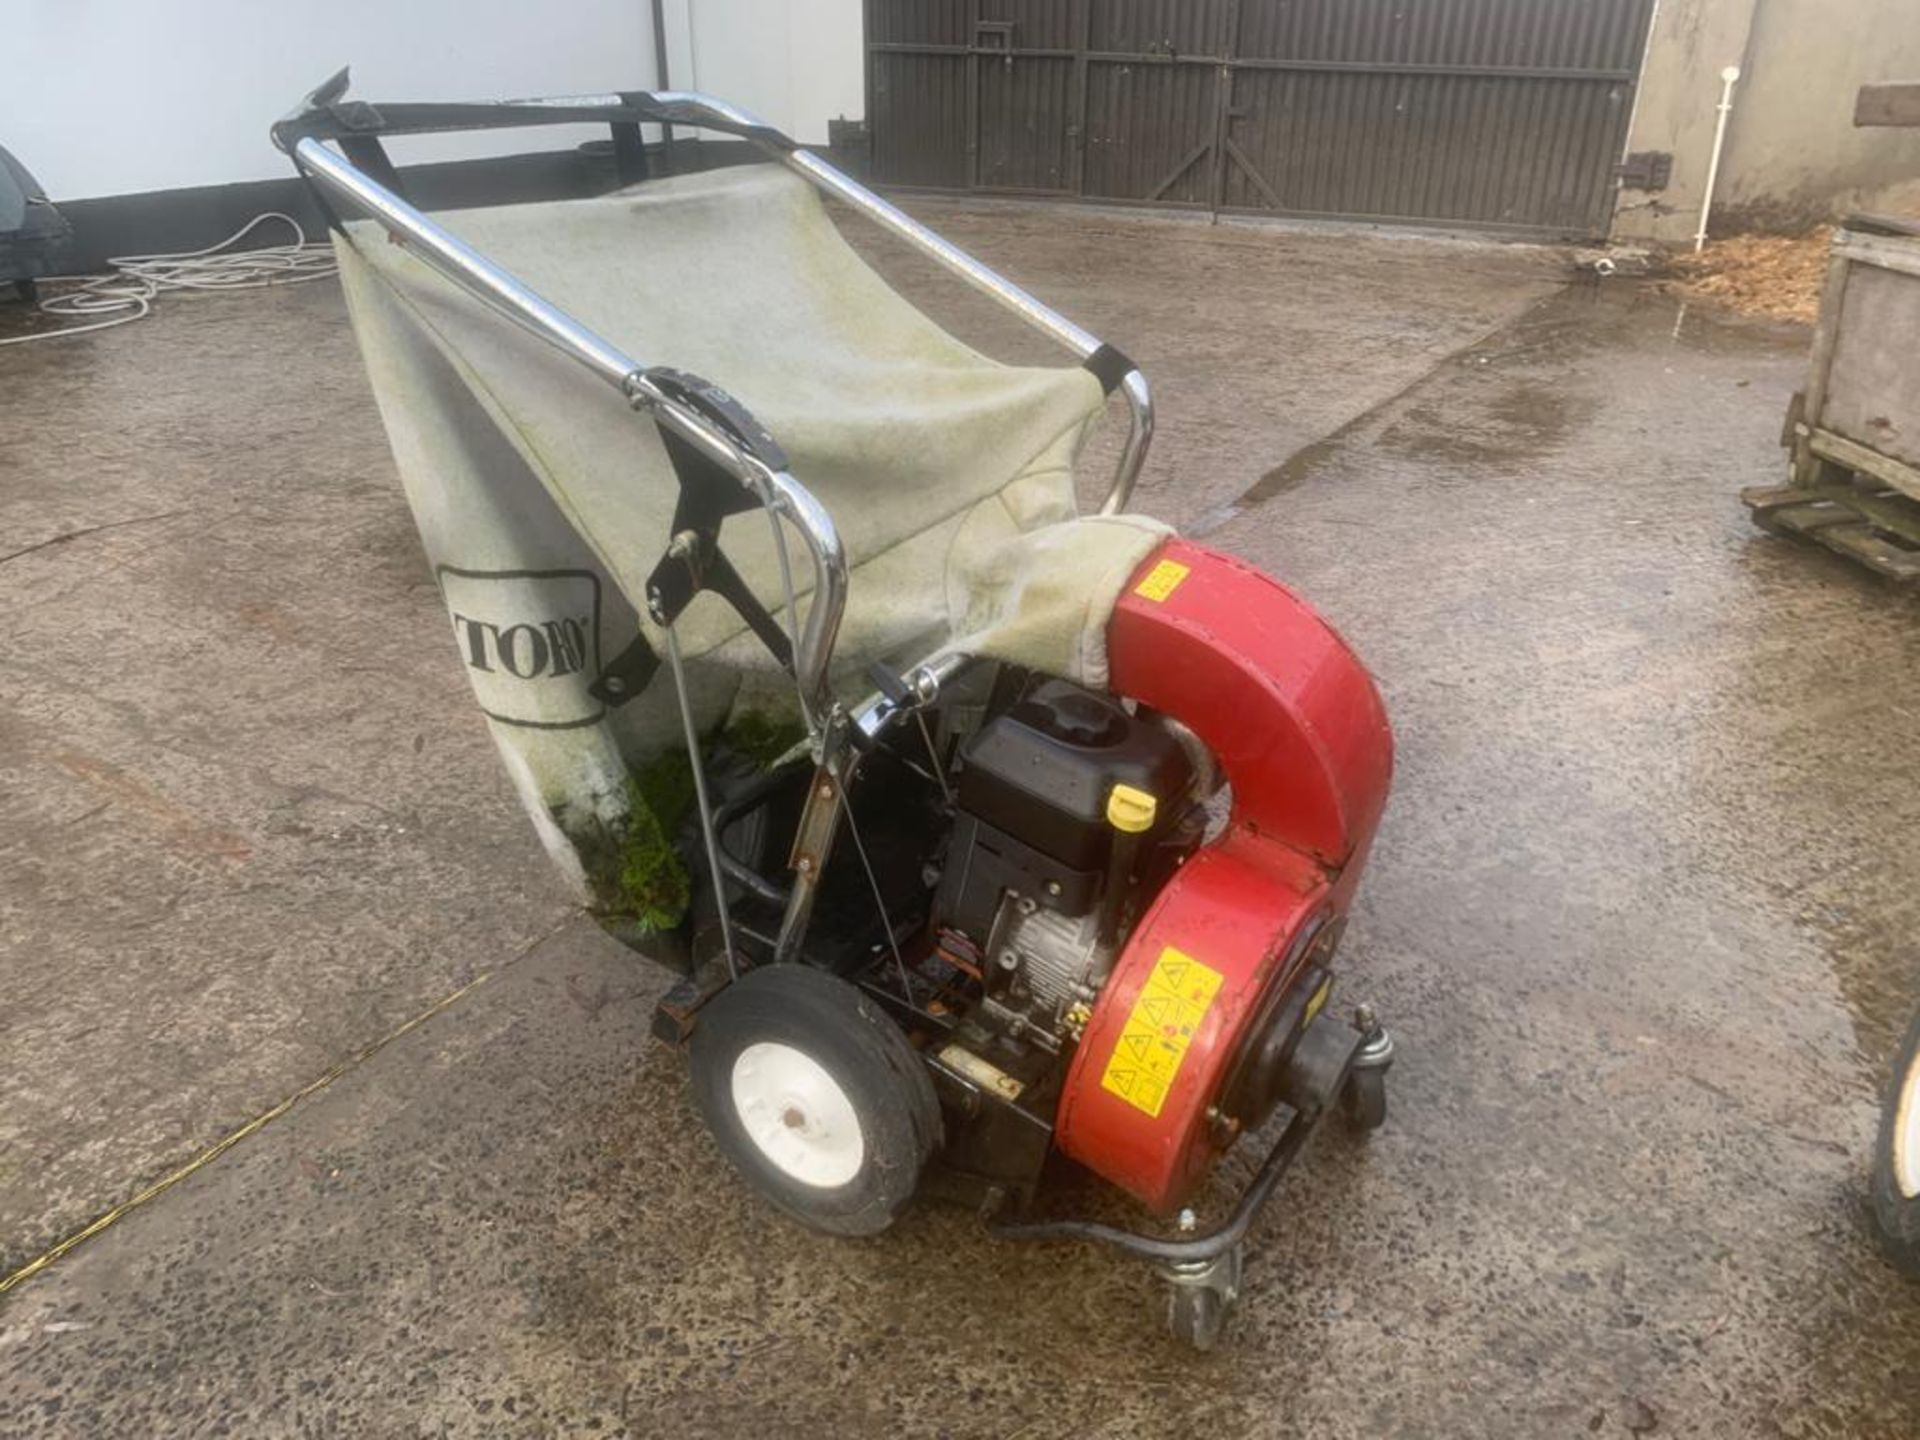 TORO BILLY GOAT LEAF BLOWER, DELIVERY ANYWHERE UK £150 *PLUS VAT* - Image 4 of 4